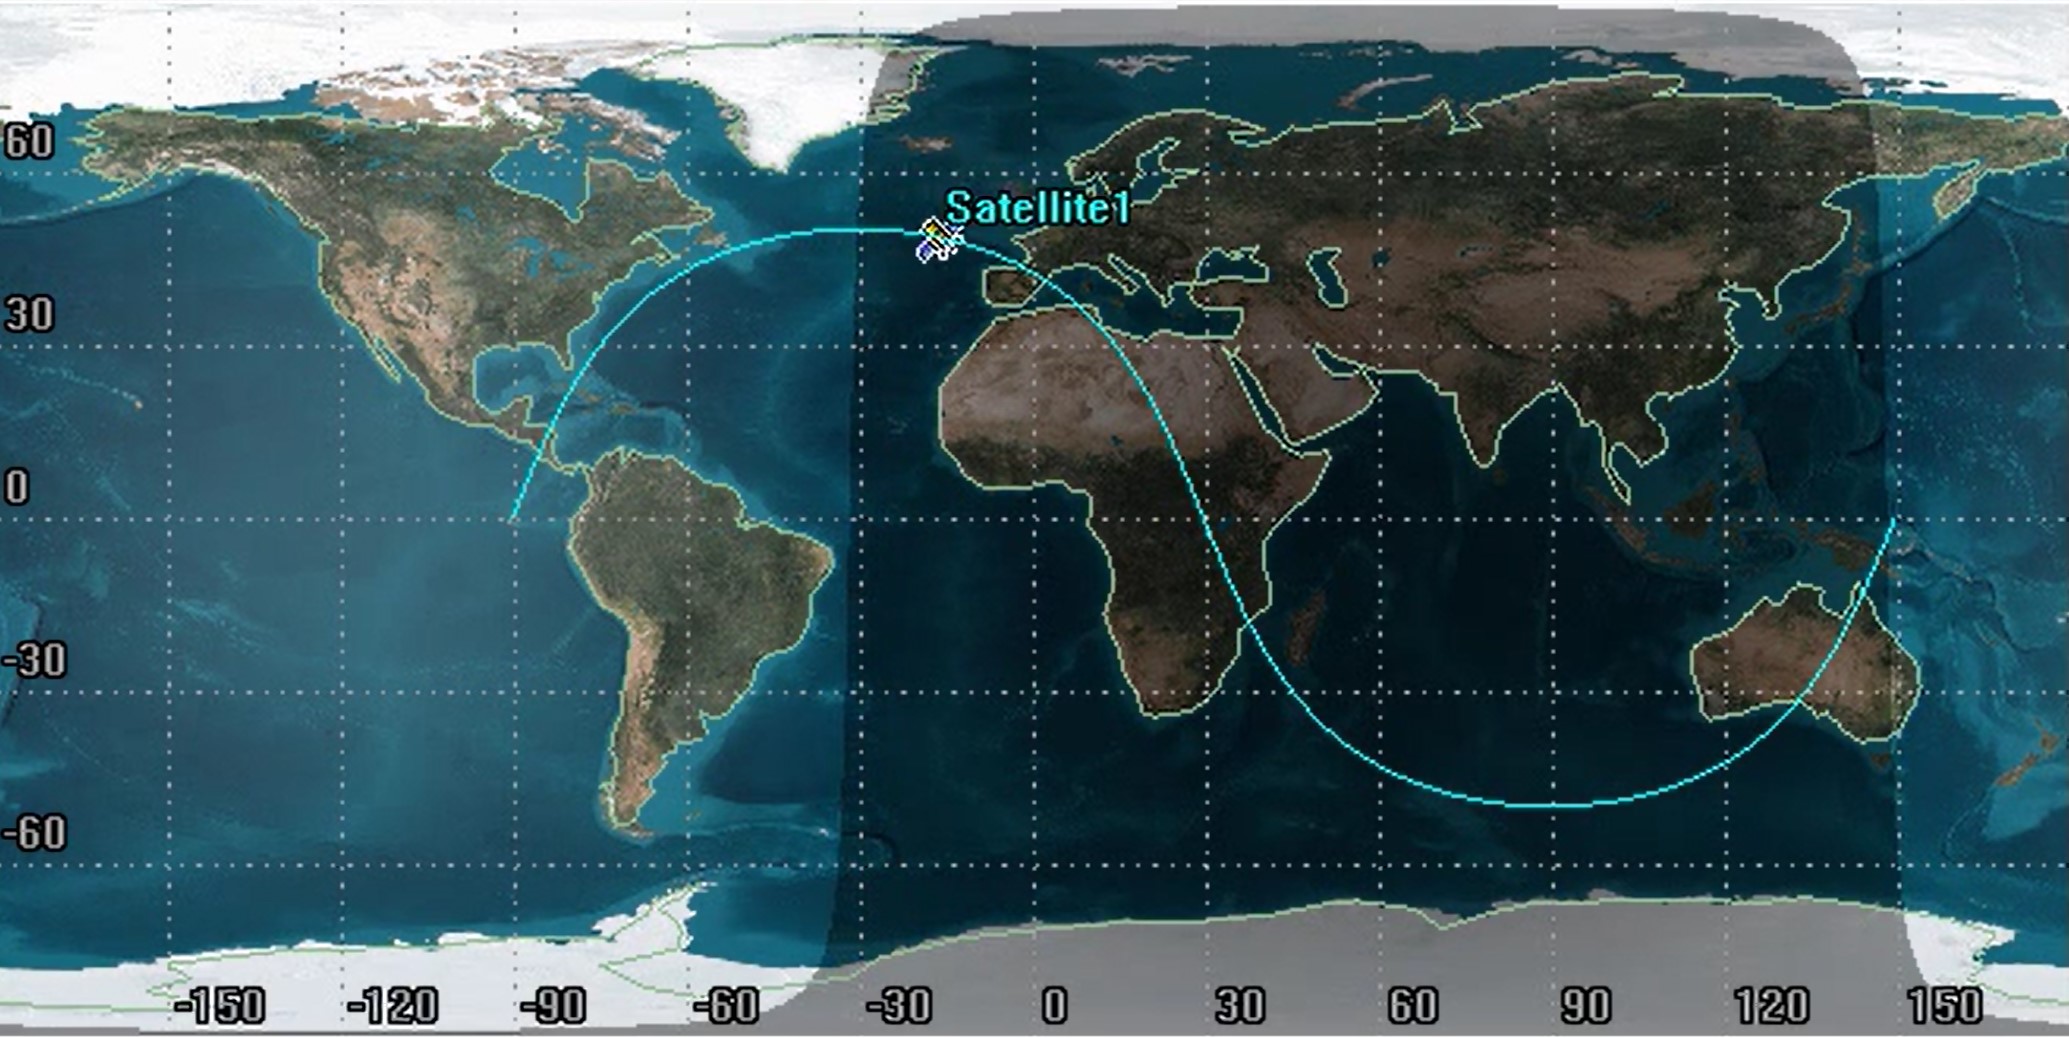 The provided image illustrates the concept of a ground track, a 2D representation of the Earth that displays the trajectory of a spacecraft over its surface. This visualization is a valuable tool for understanding the geometry and physical layout of an orbit in relation to the Earth's geography. The animation likely demonstrates how the spacecraft's ground track changes over time, showcasing the repetitive nature of certain types of orbits.